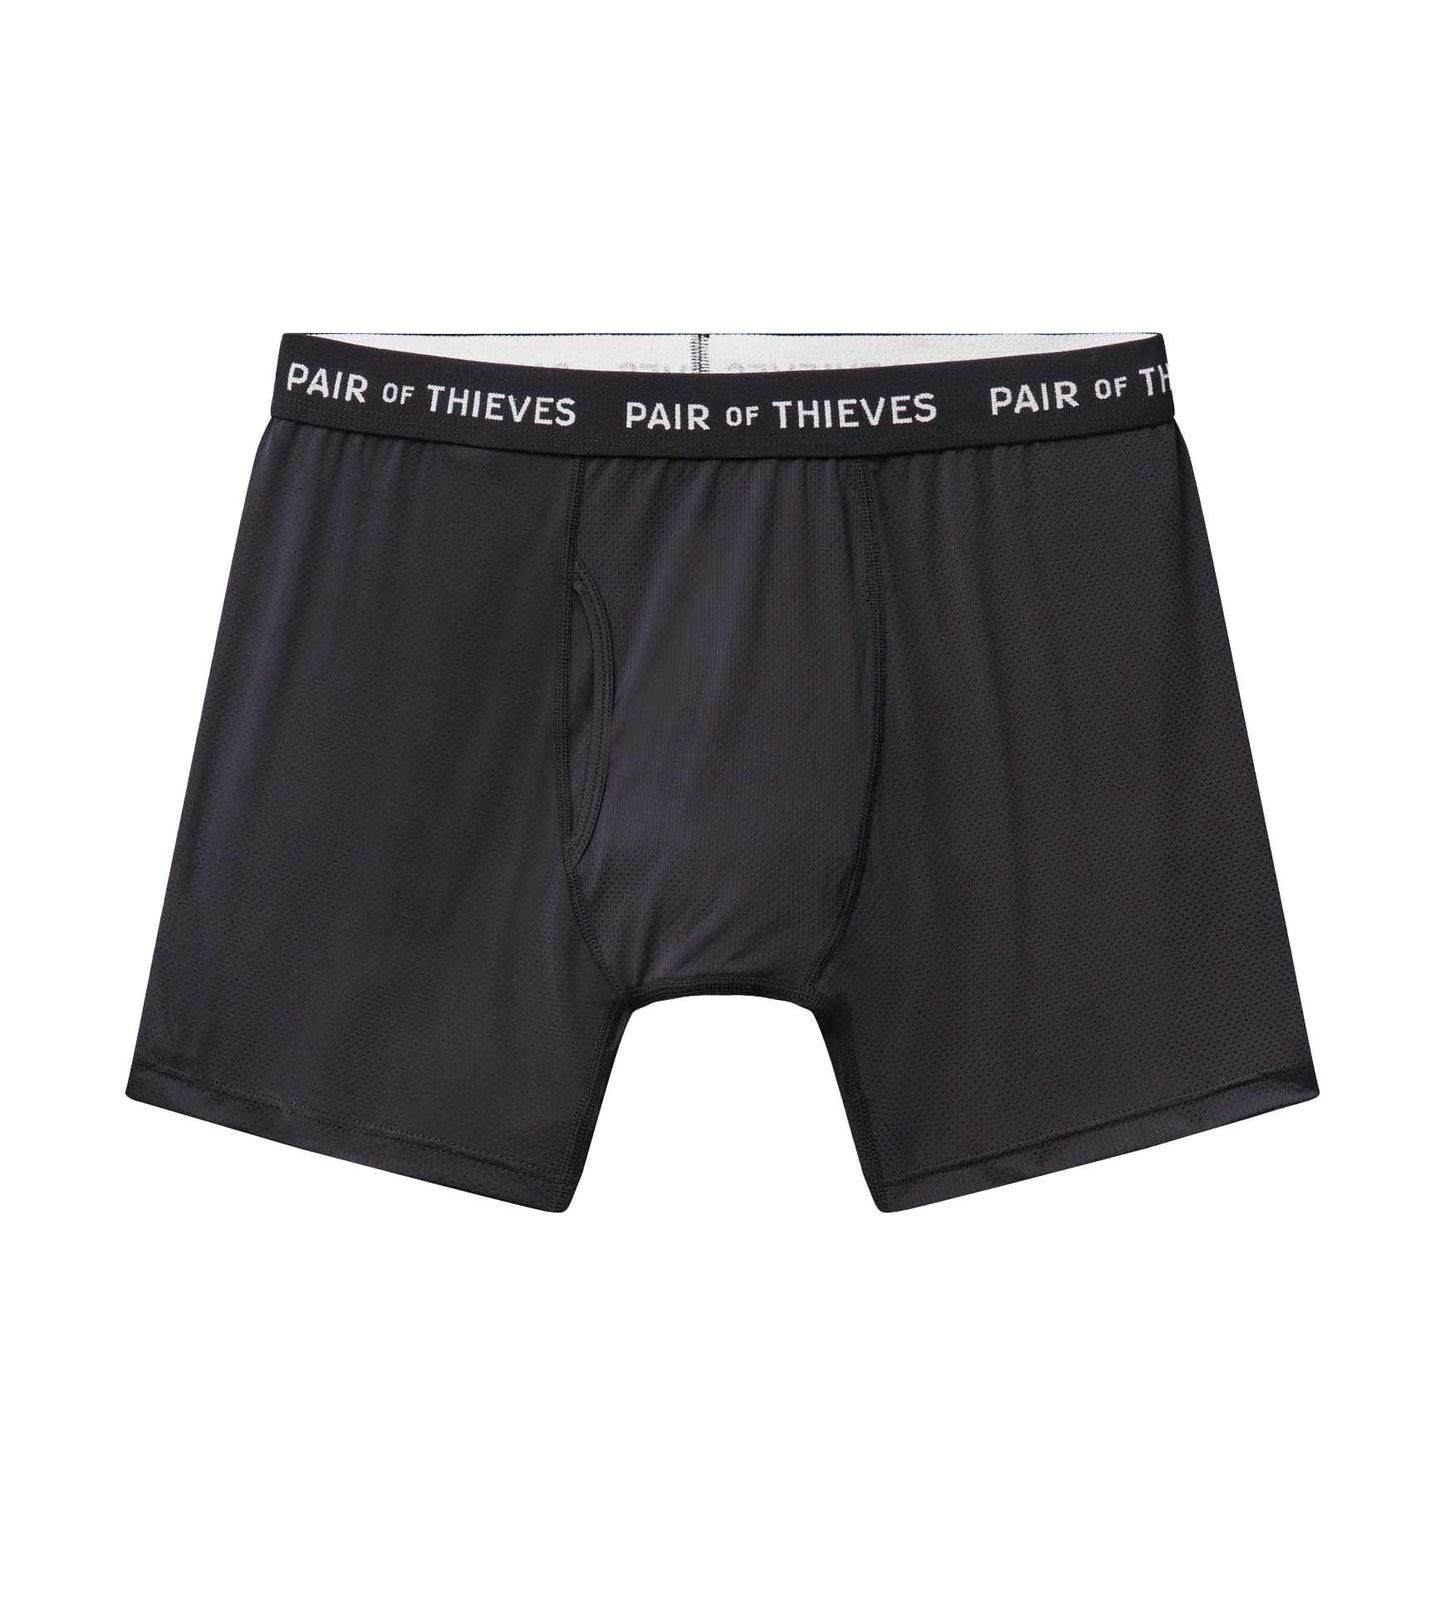 SuperFit Boxer Briefs 2 Pack - Man Cave Painting - Pair of Thieves